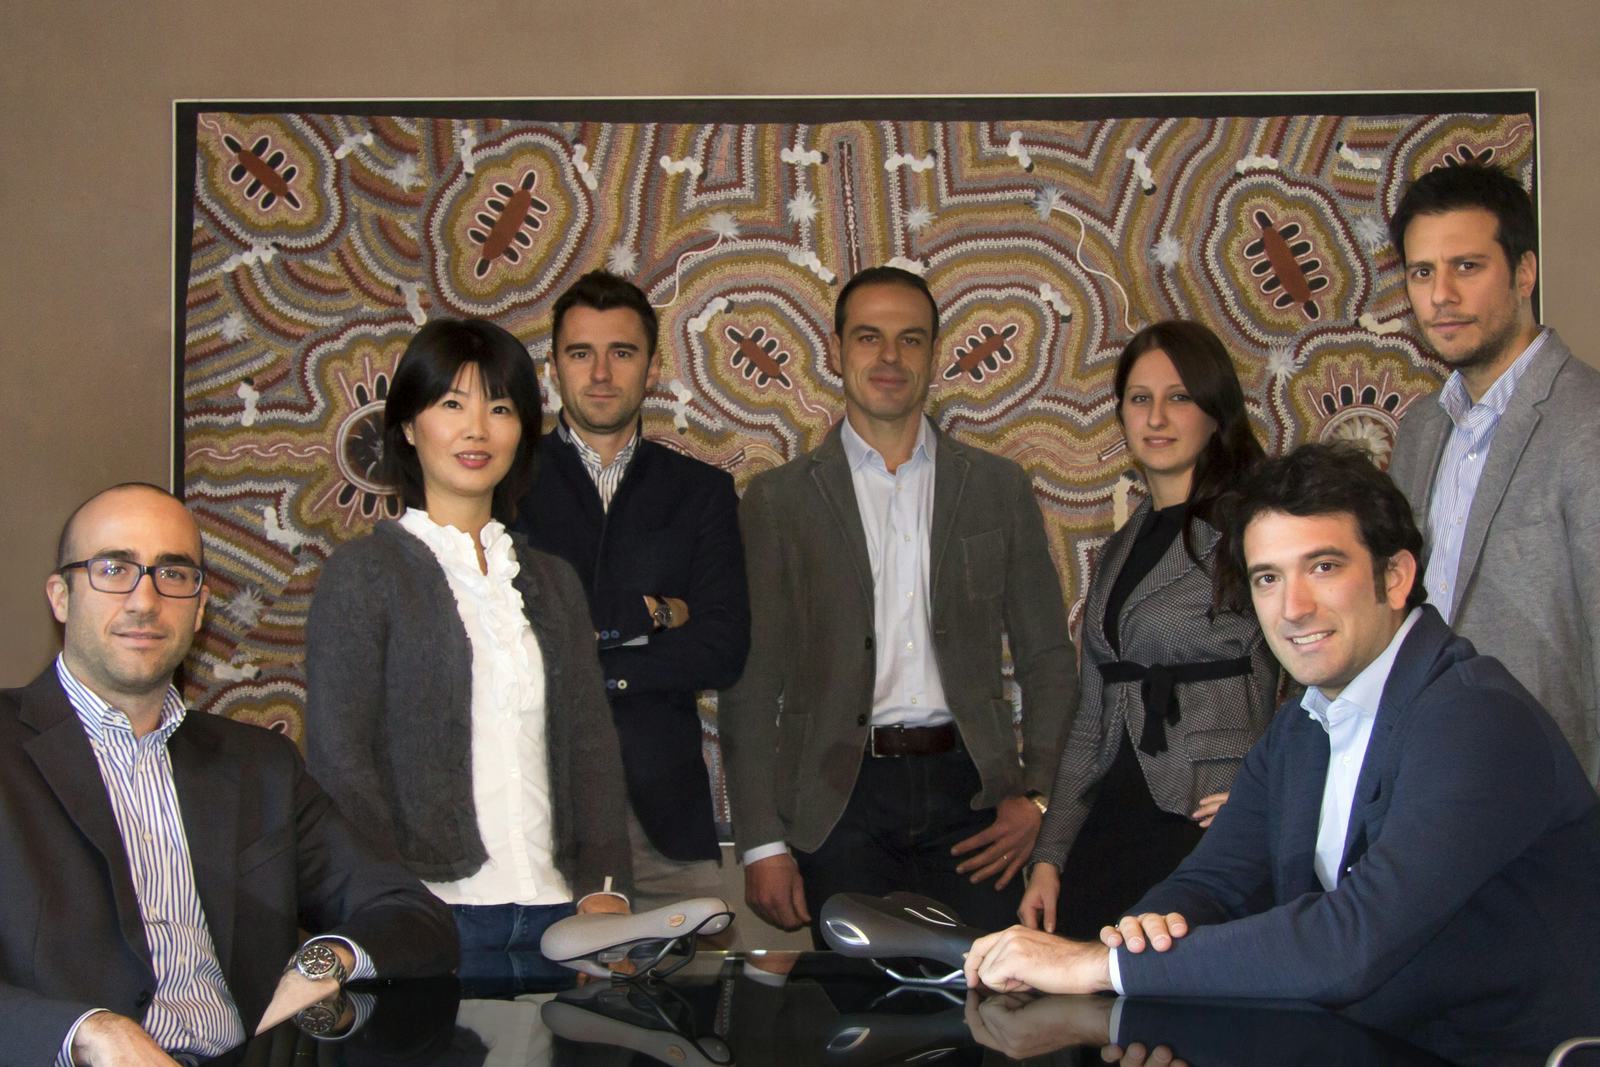 The Selle Royal support team for the Benelux market, (left to right): Alvise Sartori - Benelux AM Area Sales Manager, Jindan Li - Business Manager Private Label AM, Roberto Bucci - Brand Manager, Andrea Cecchinato - Chief Operating Officer, Monica Savio - Marketing Coordinator, Pietro Tomasella - Germany AM Area Sales Manager, Nicolò Mannoni - AM Business Unit Director. – Photo Selle Royal